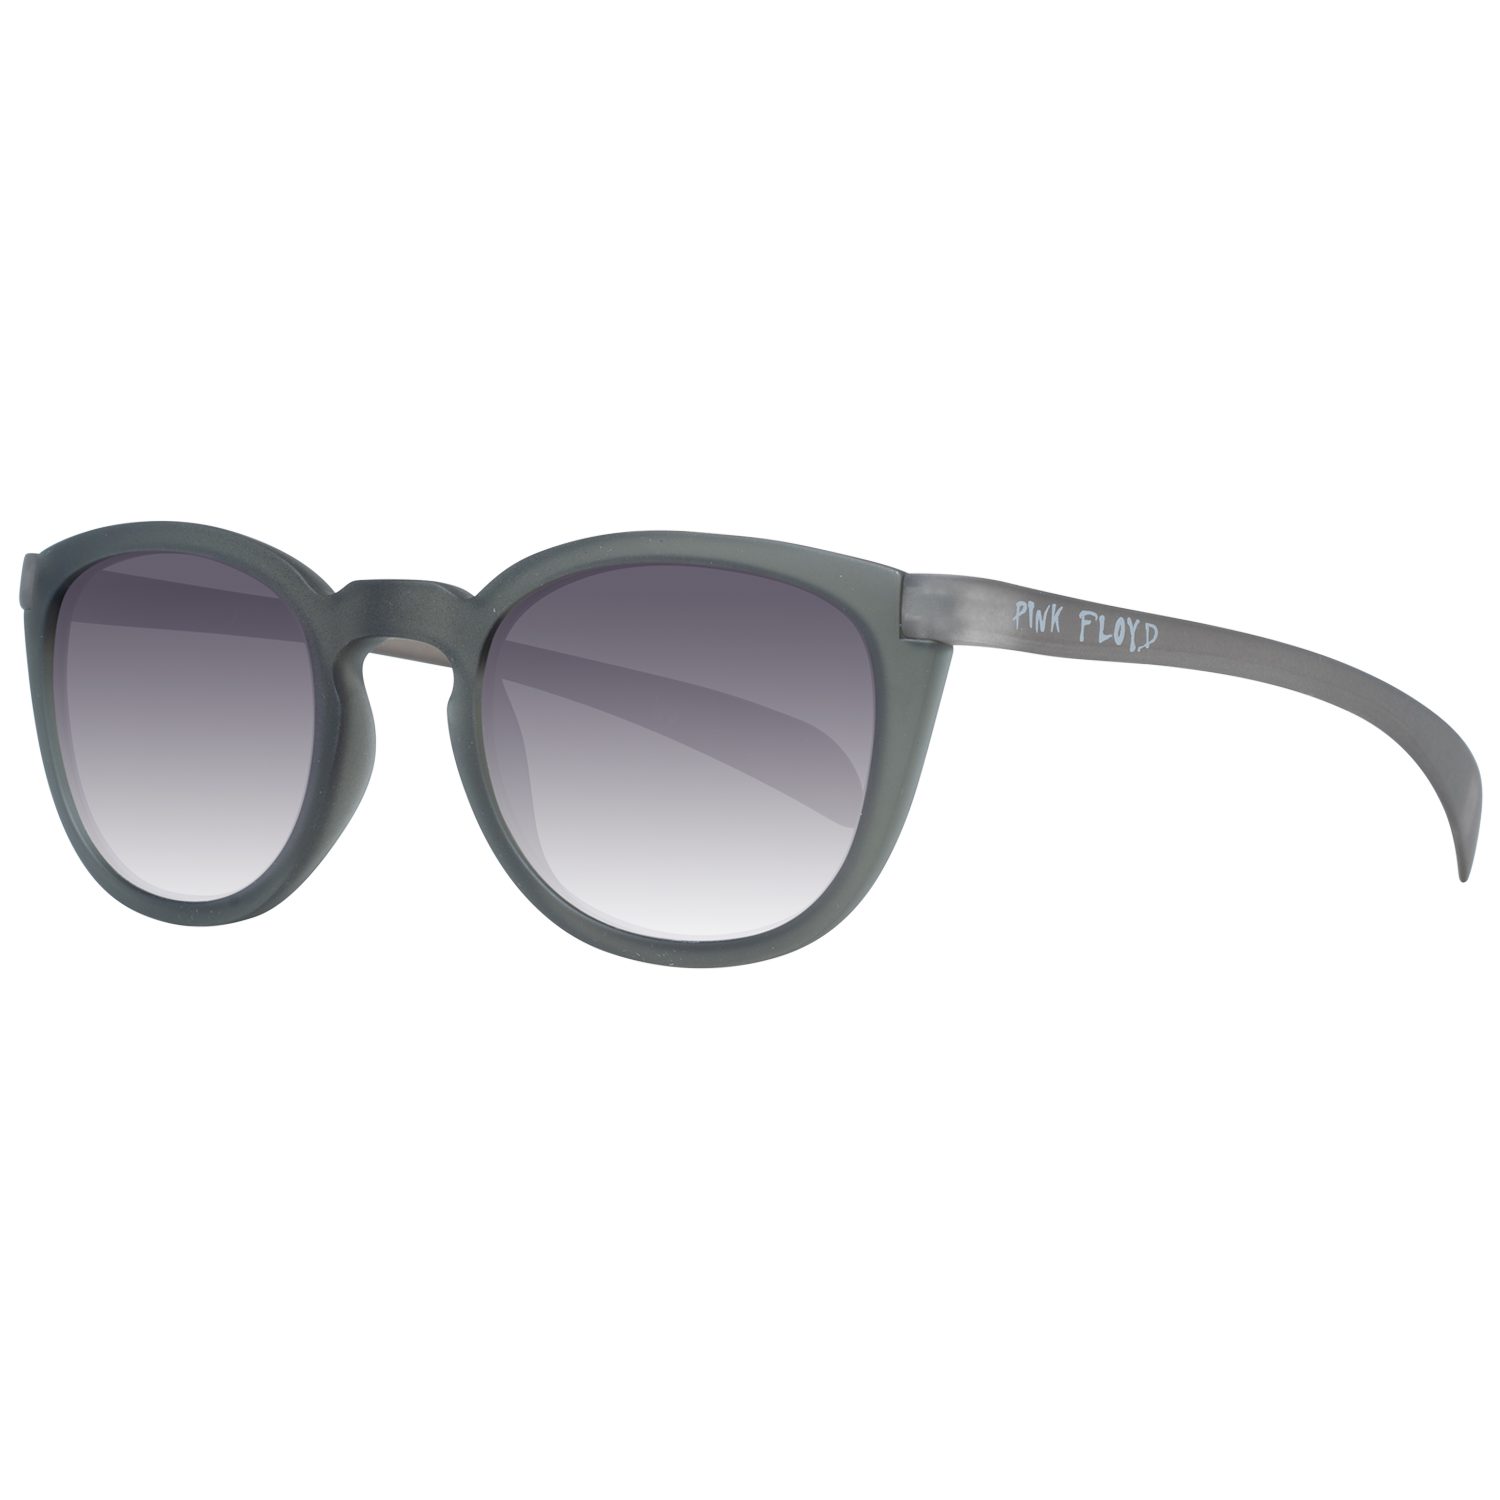 Try Cover Change Sonnenbrille TS503 4804